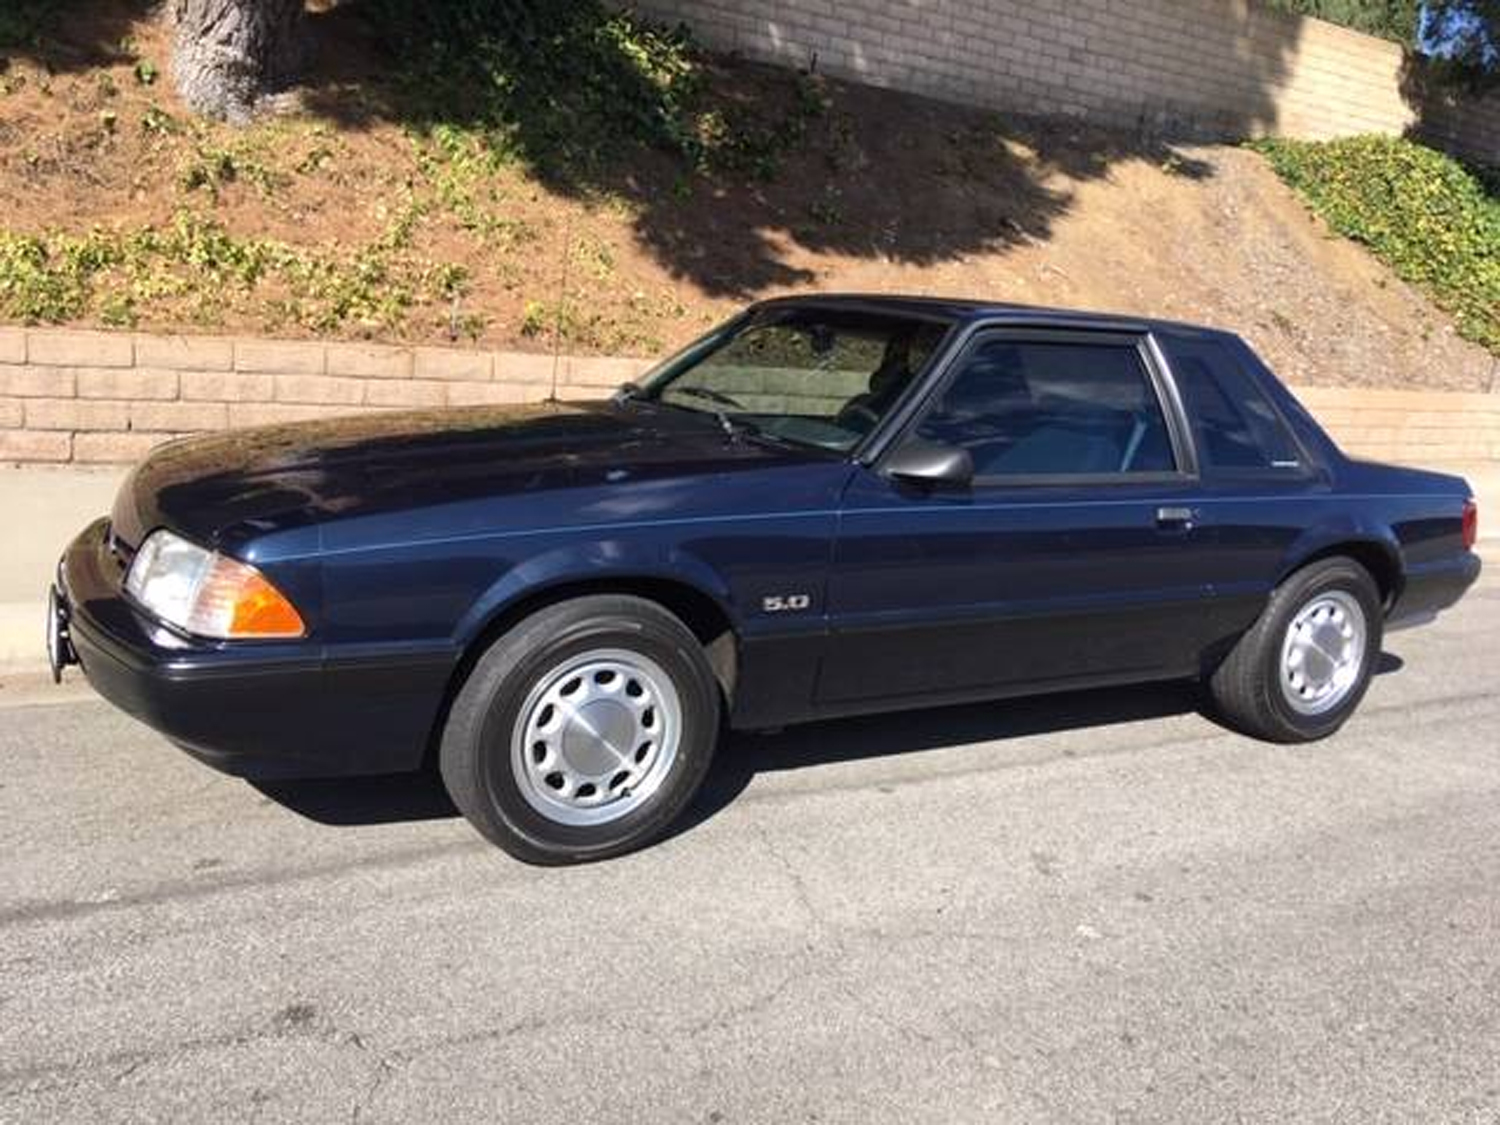 1989 Mustang Lx 5.0 Value